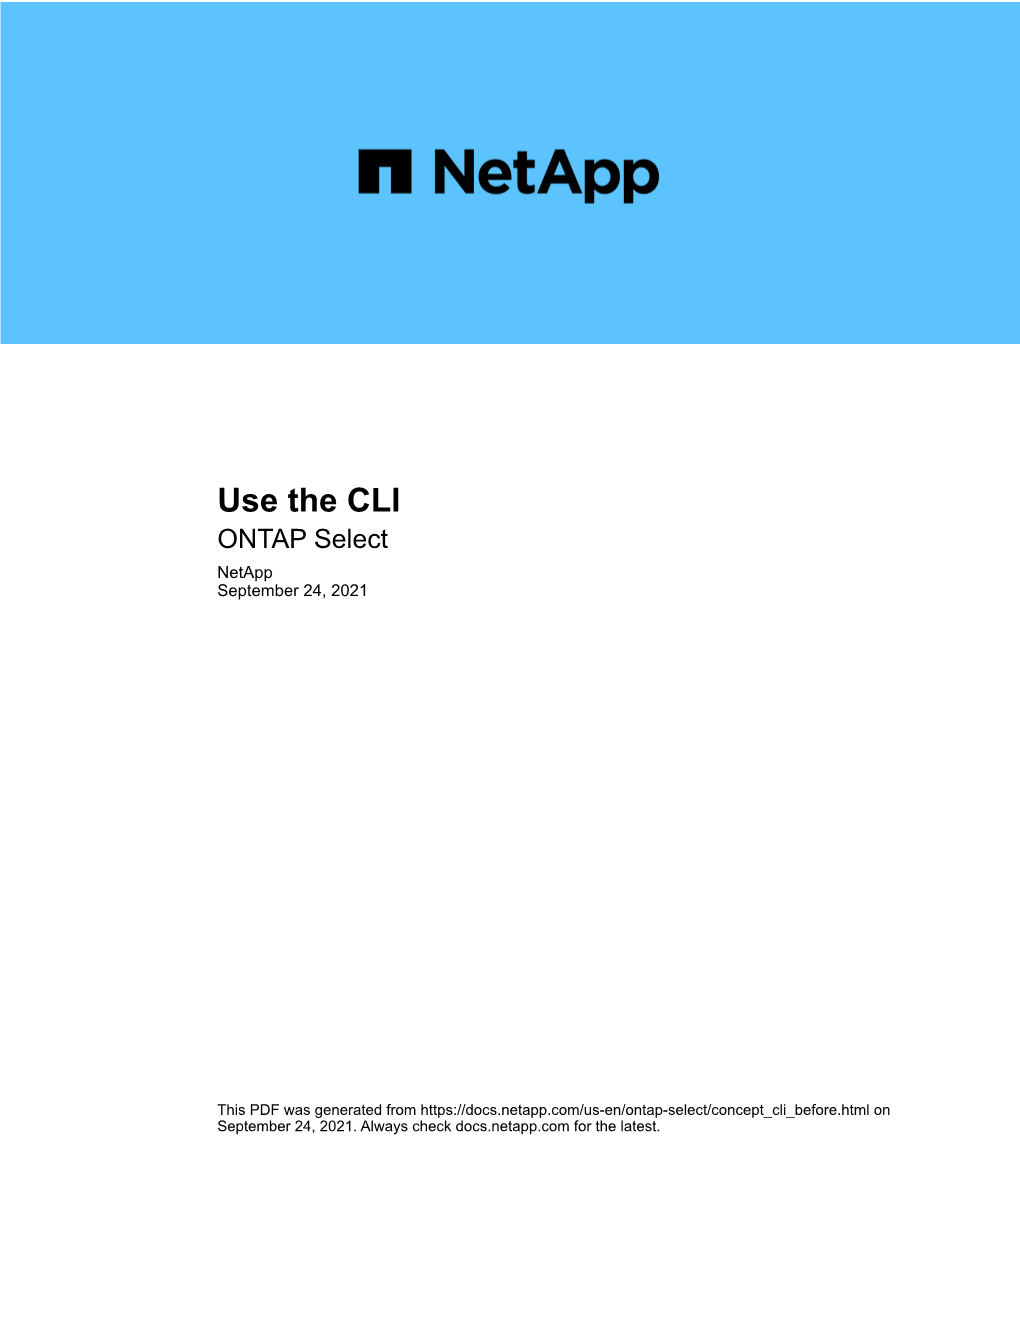 Use the CLI : ONTAP Select